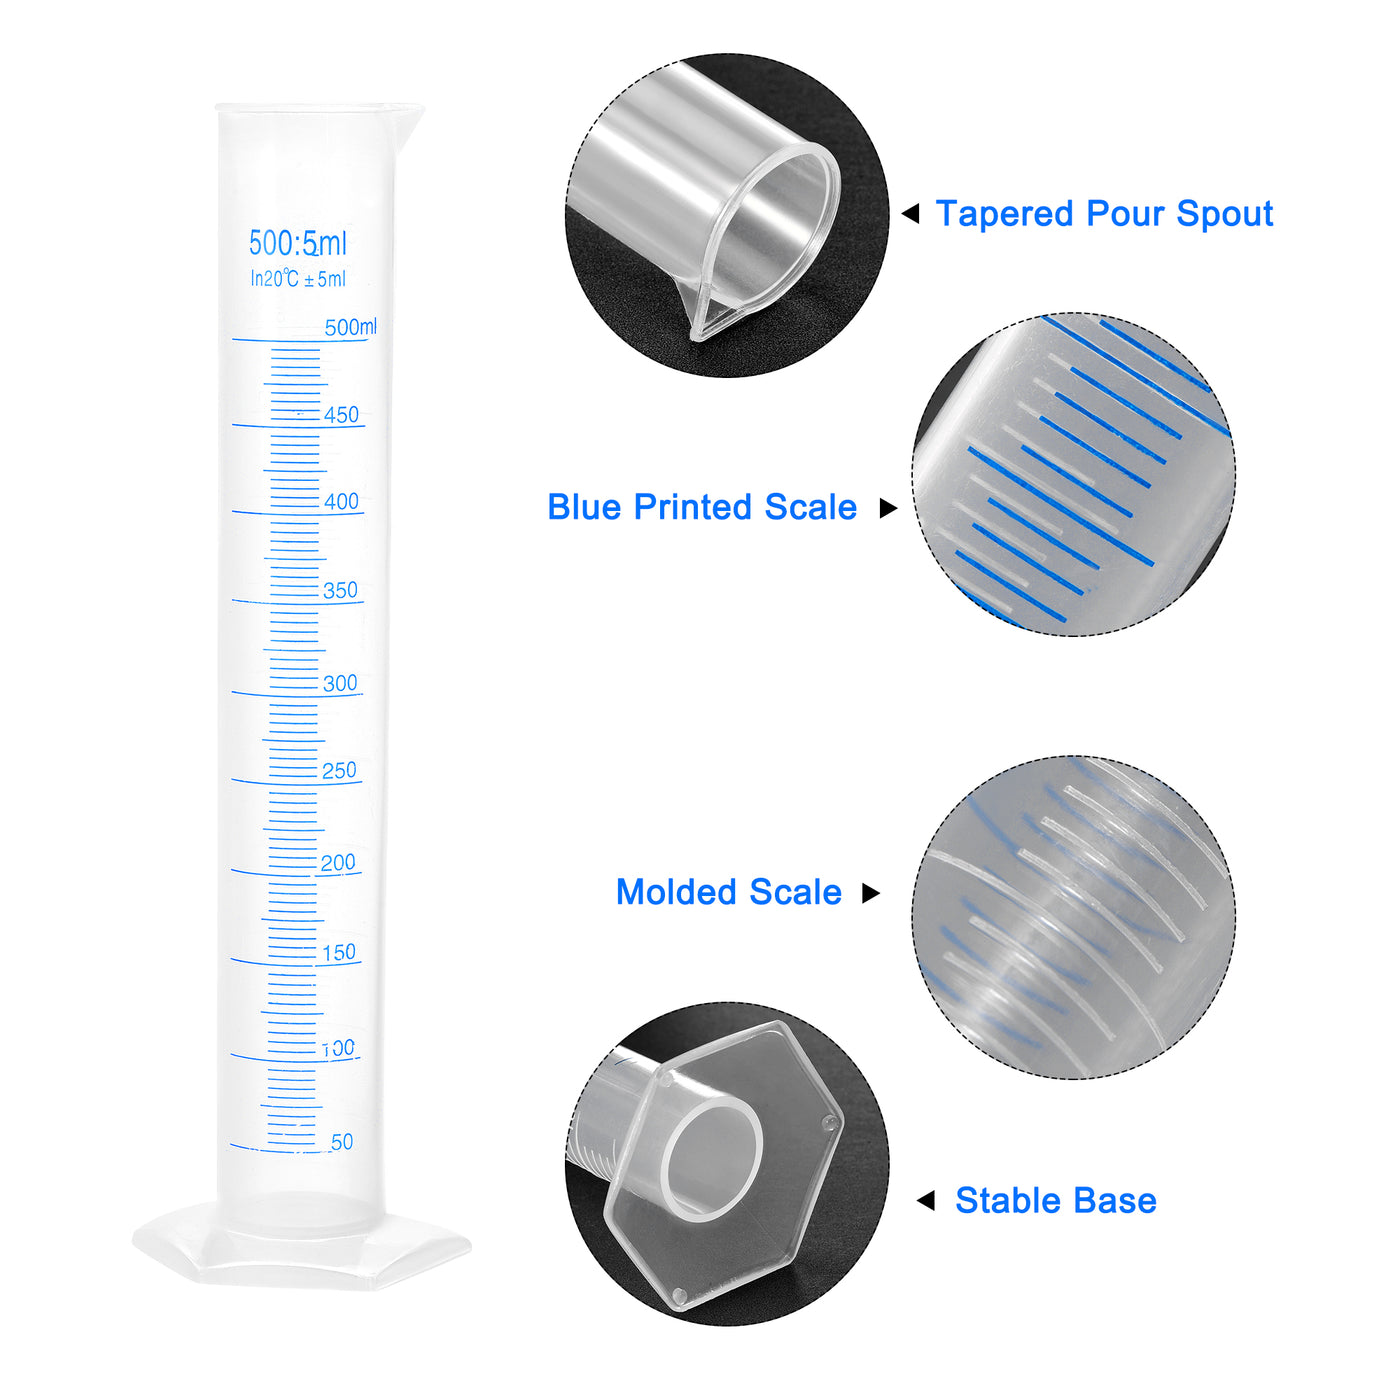 uxcell Uxcell Plastic Graduated Cylinder, 500ml Measuring Cylinder 2-Sided Metric Marking 2Pcs